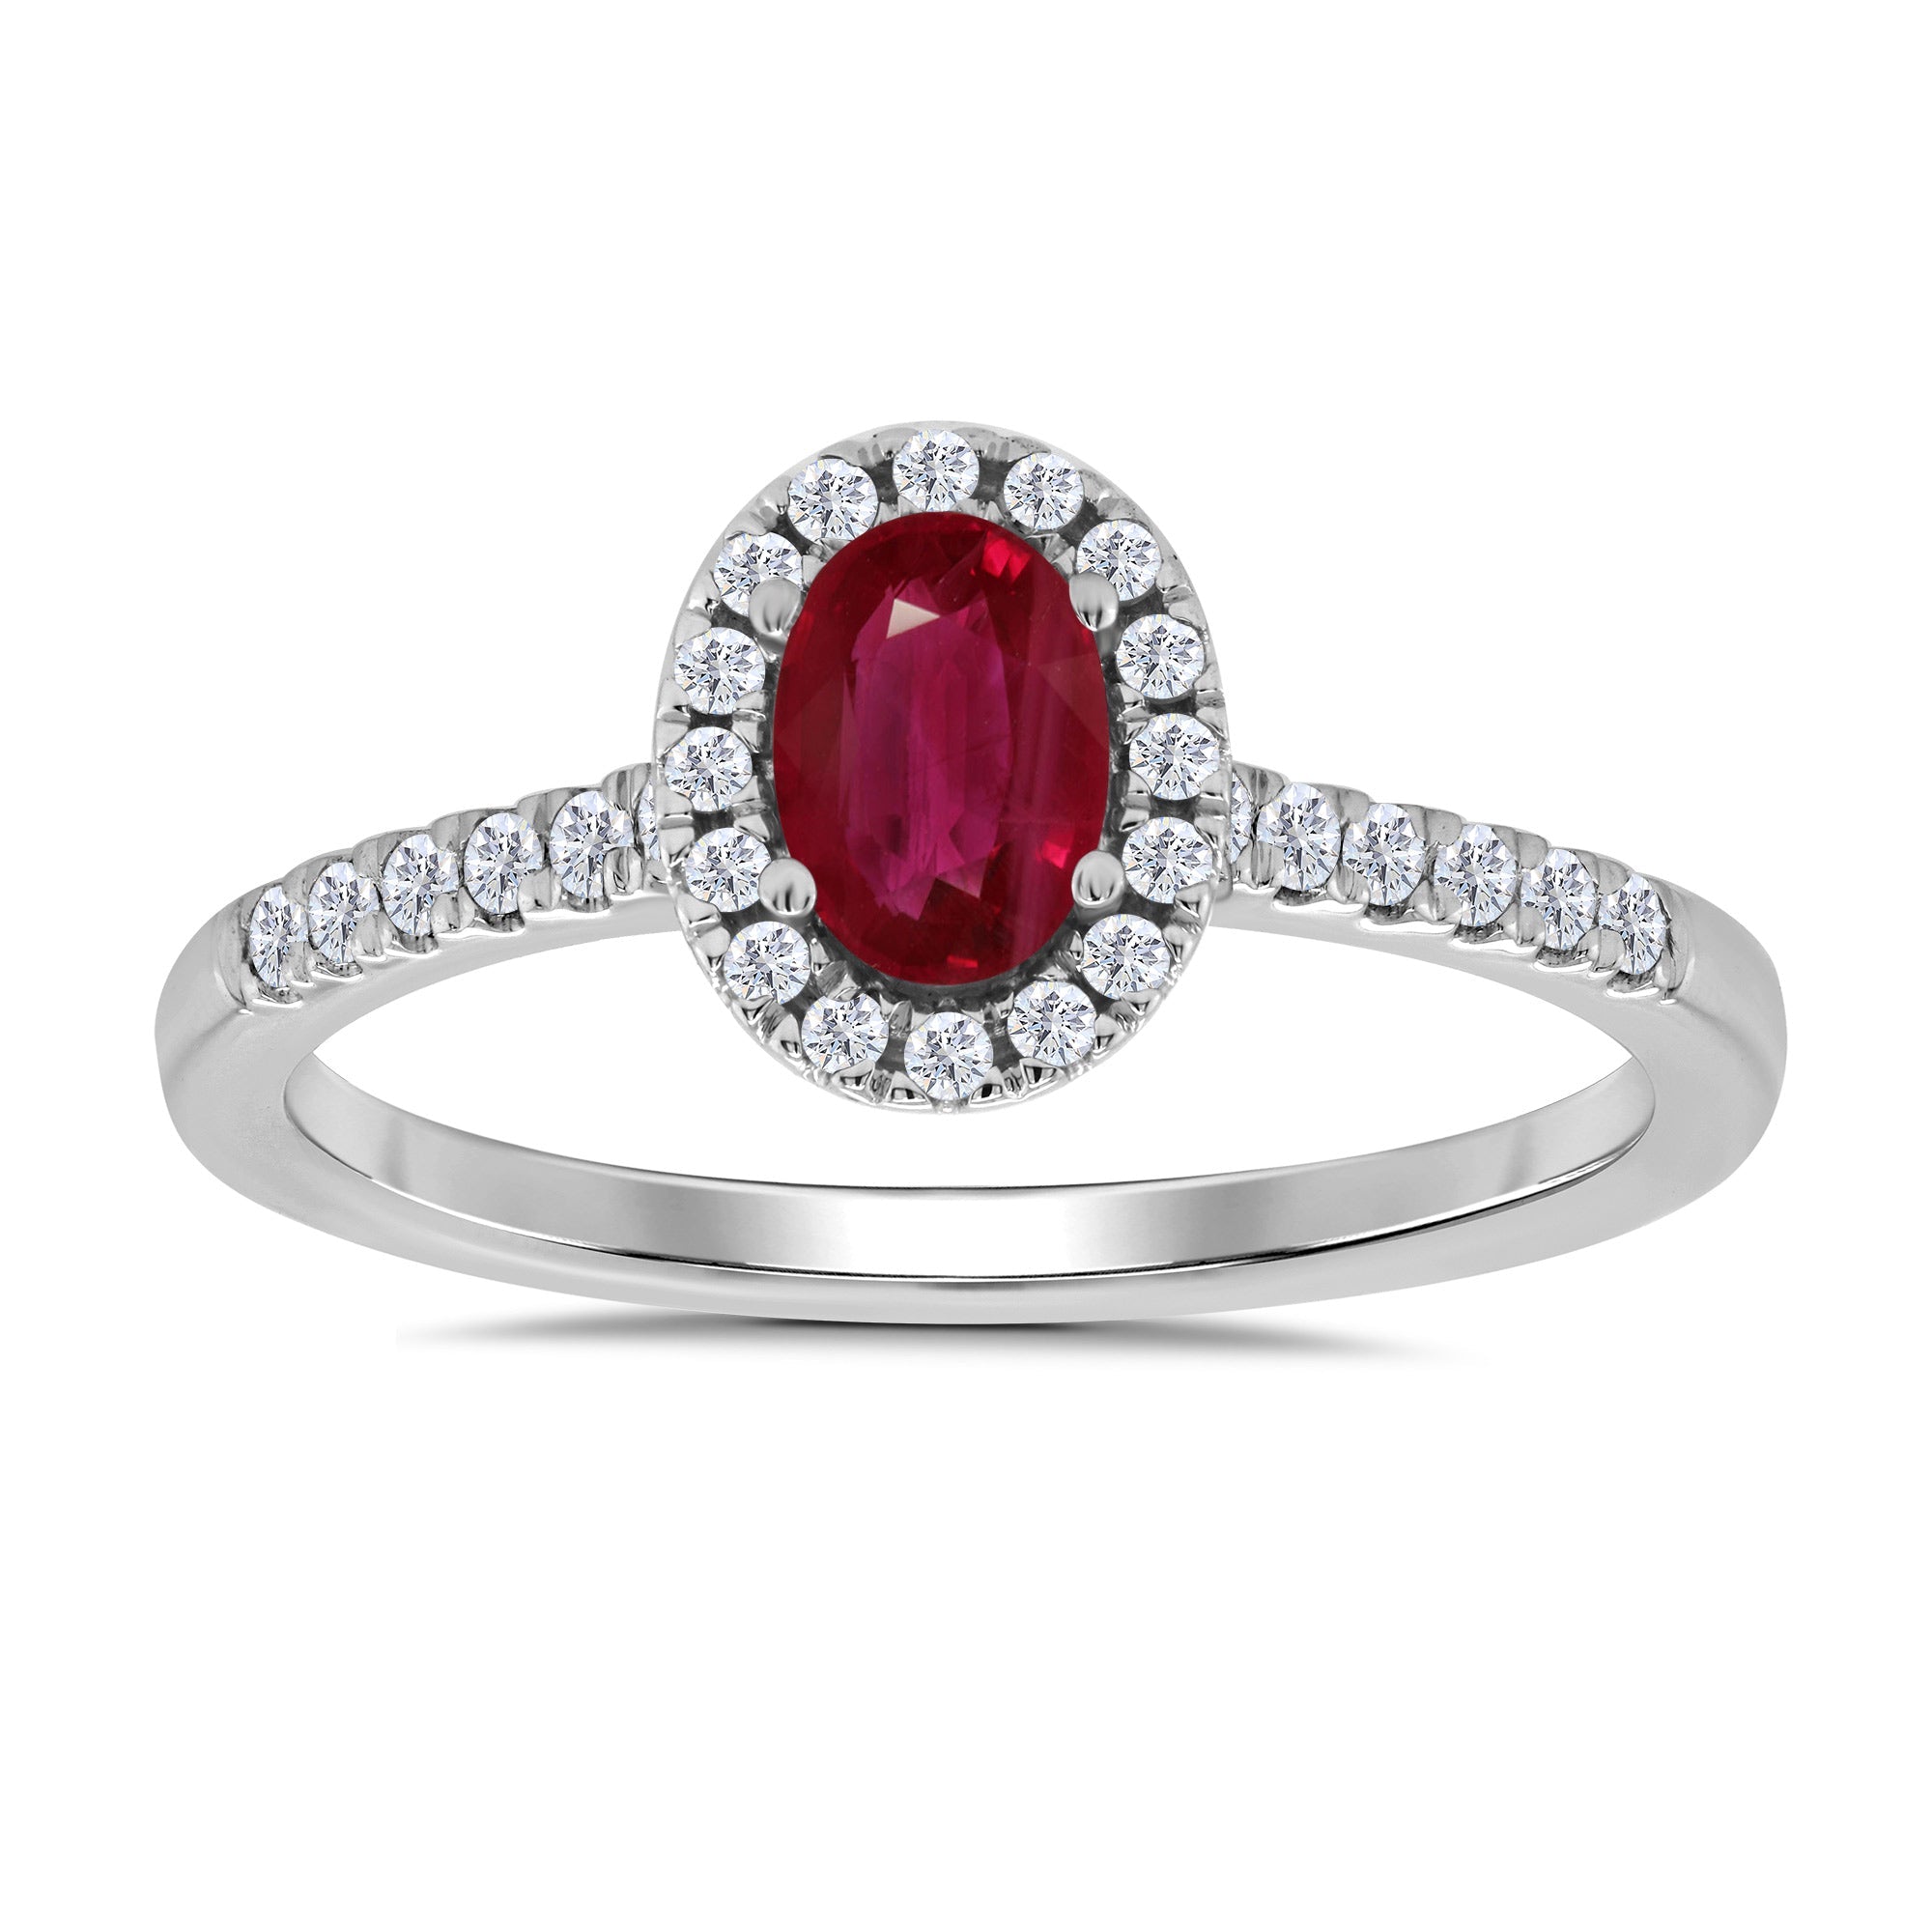 9ct white gold 6x4mm oval ruby & diamond cluster ring with diamond set shoulders 0.20ct